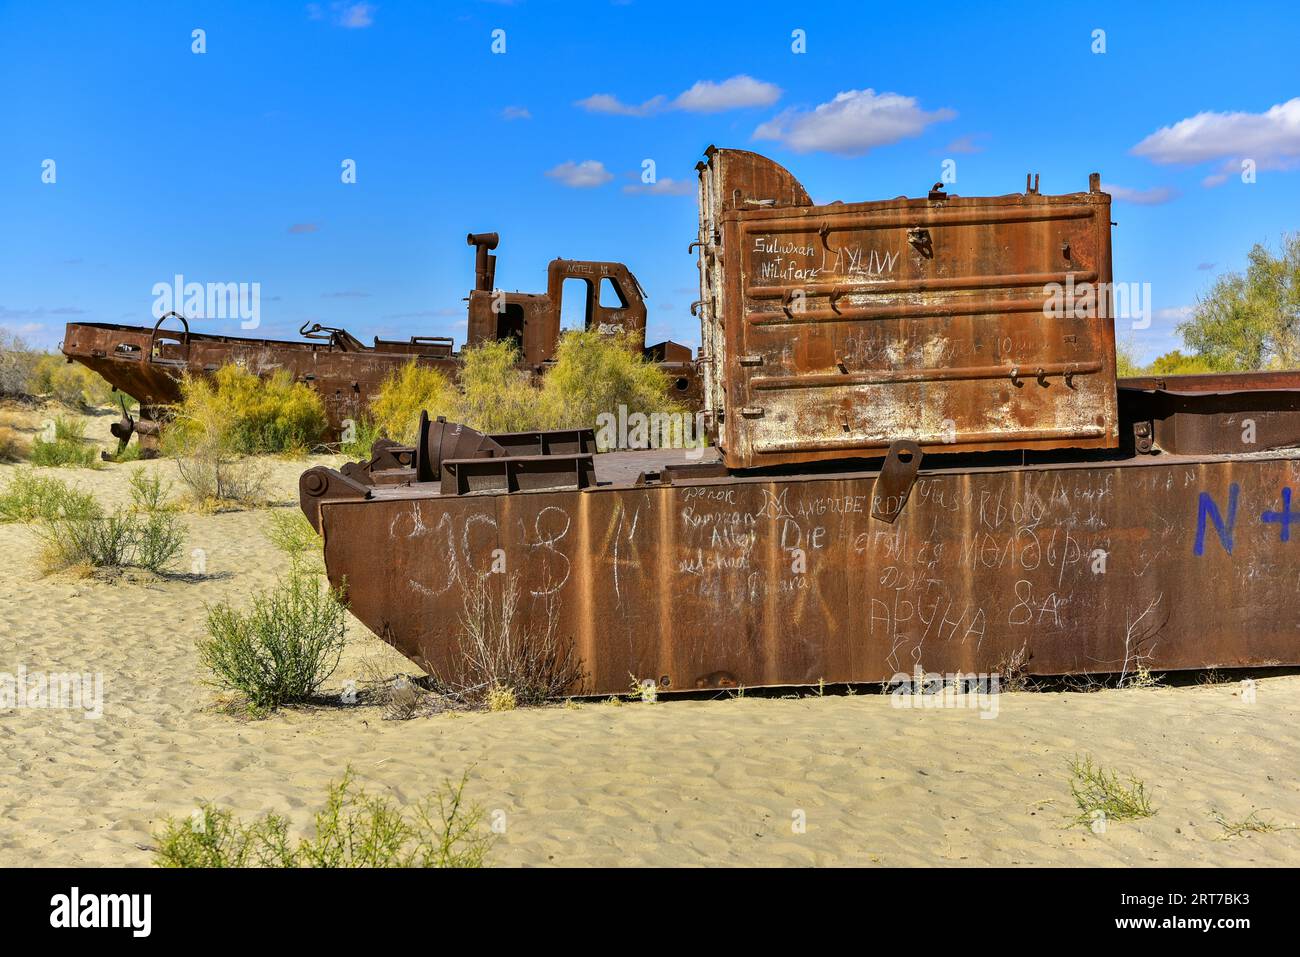 Derelict vessel lying on a desert that used to be Aral Sea, the fourth largest lake in the world up until the 1960s (2017) Stock Photo